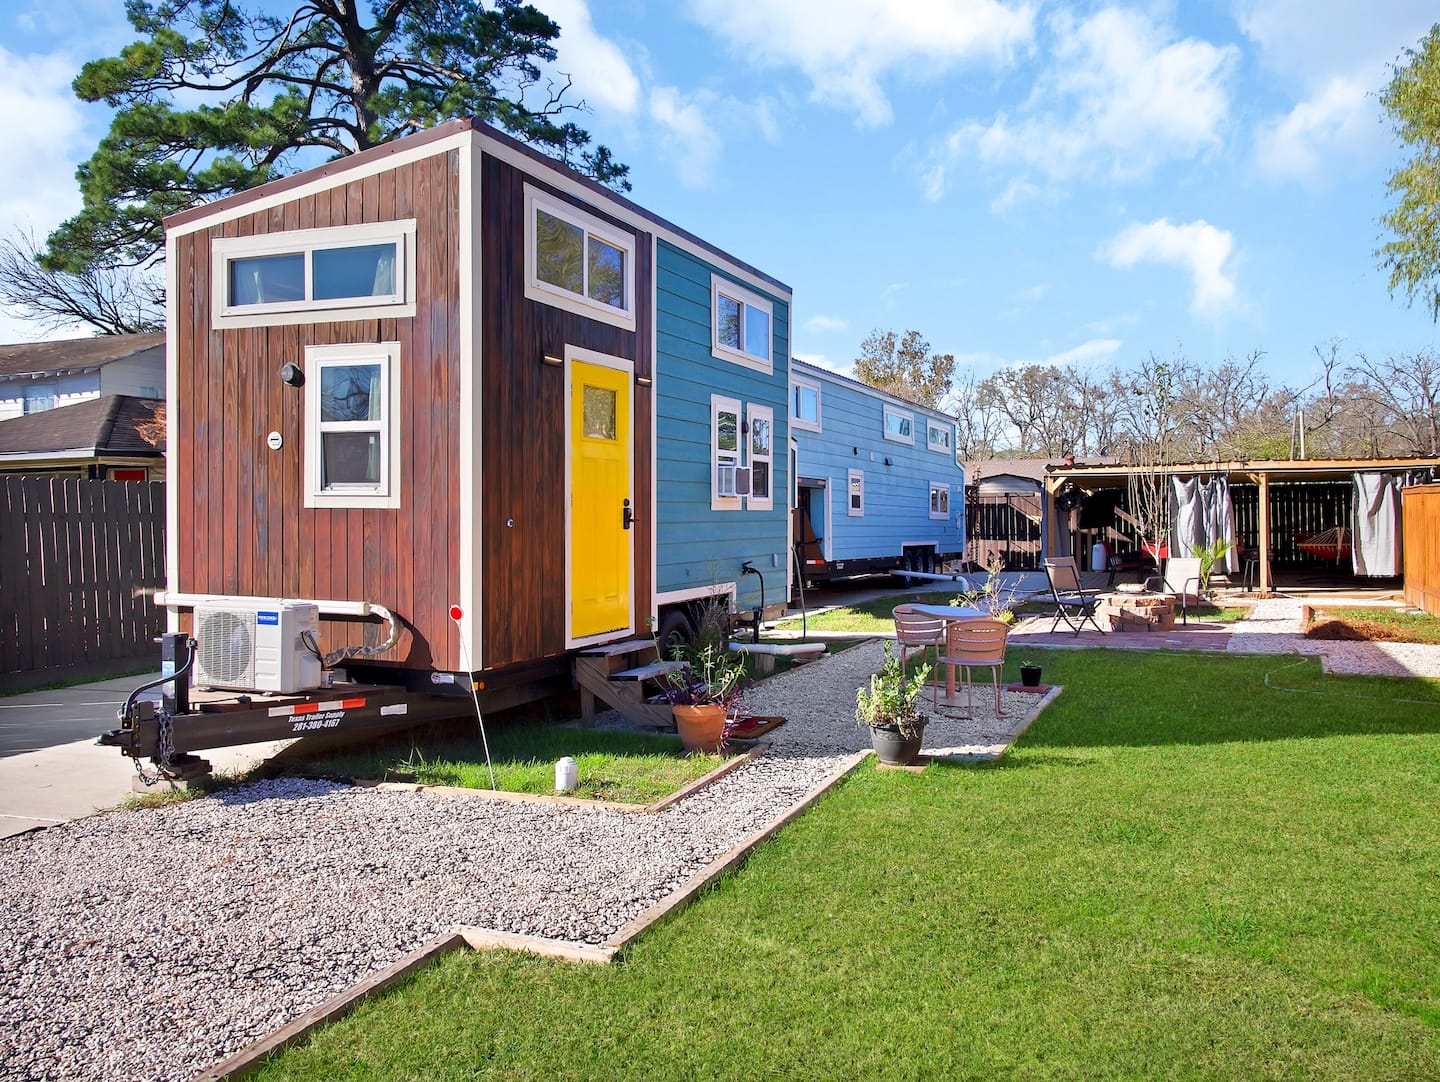 Tiny home featured in Texas Magazine as one of the best Airbnbs in Houston